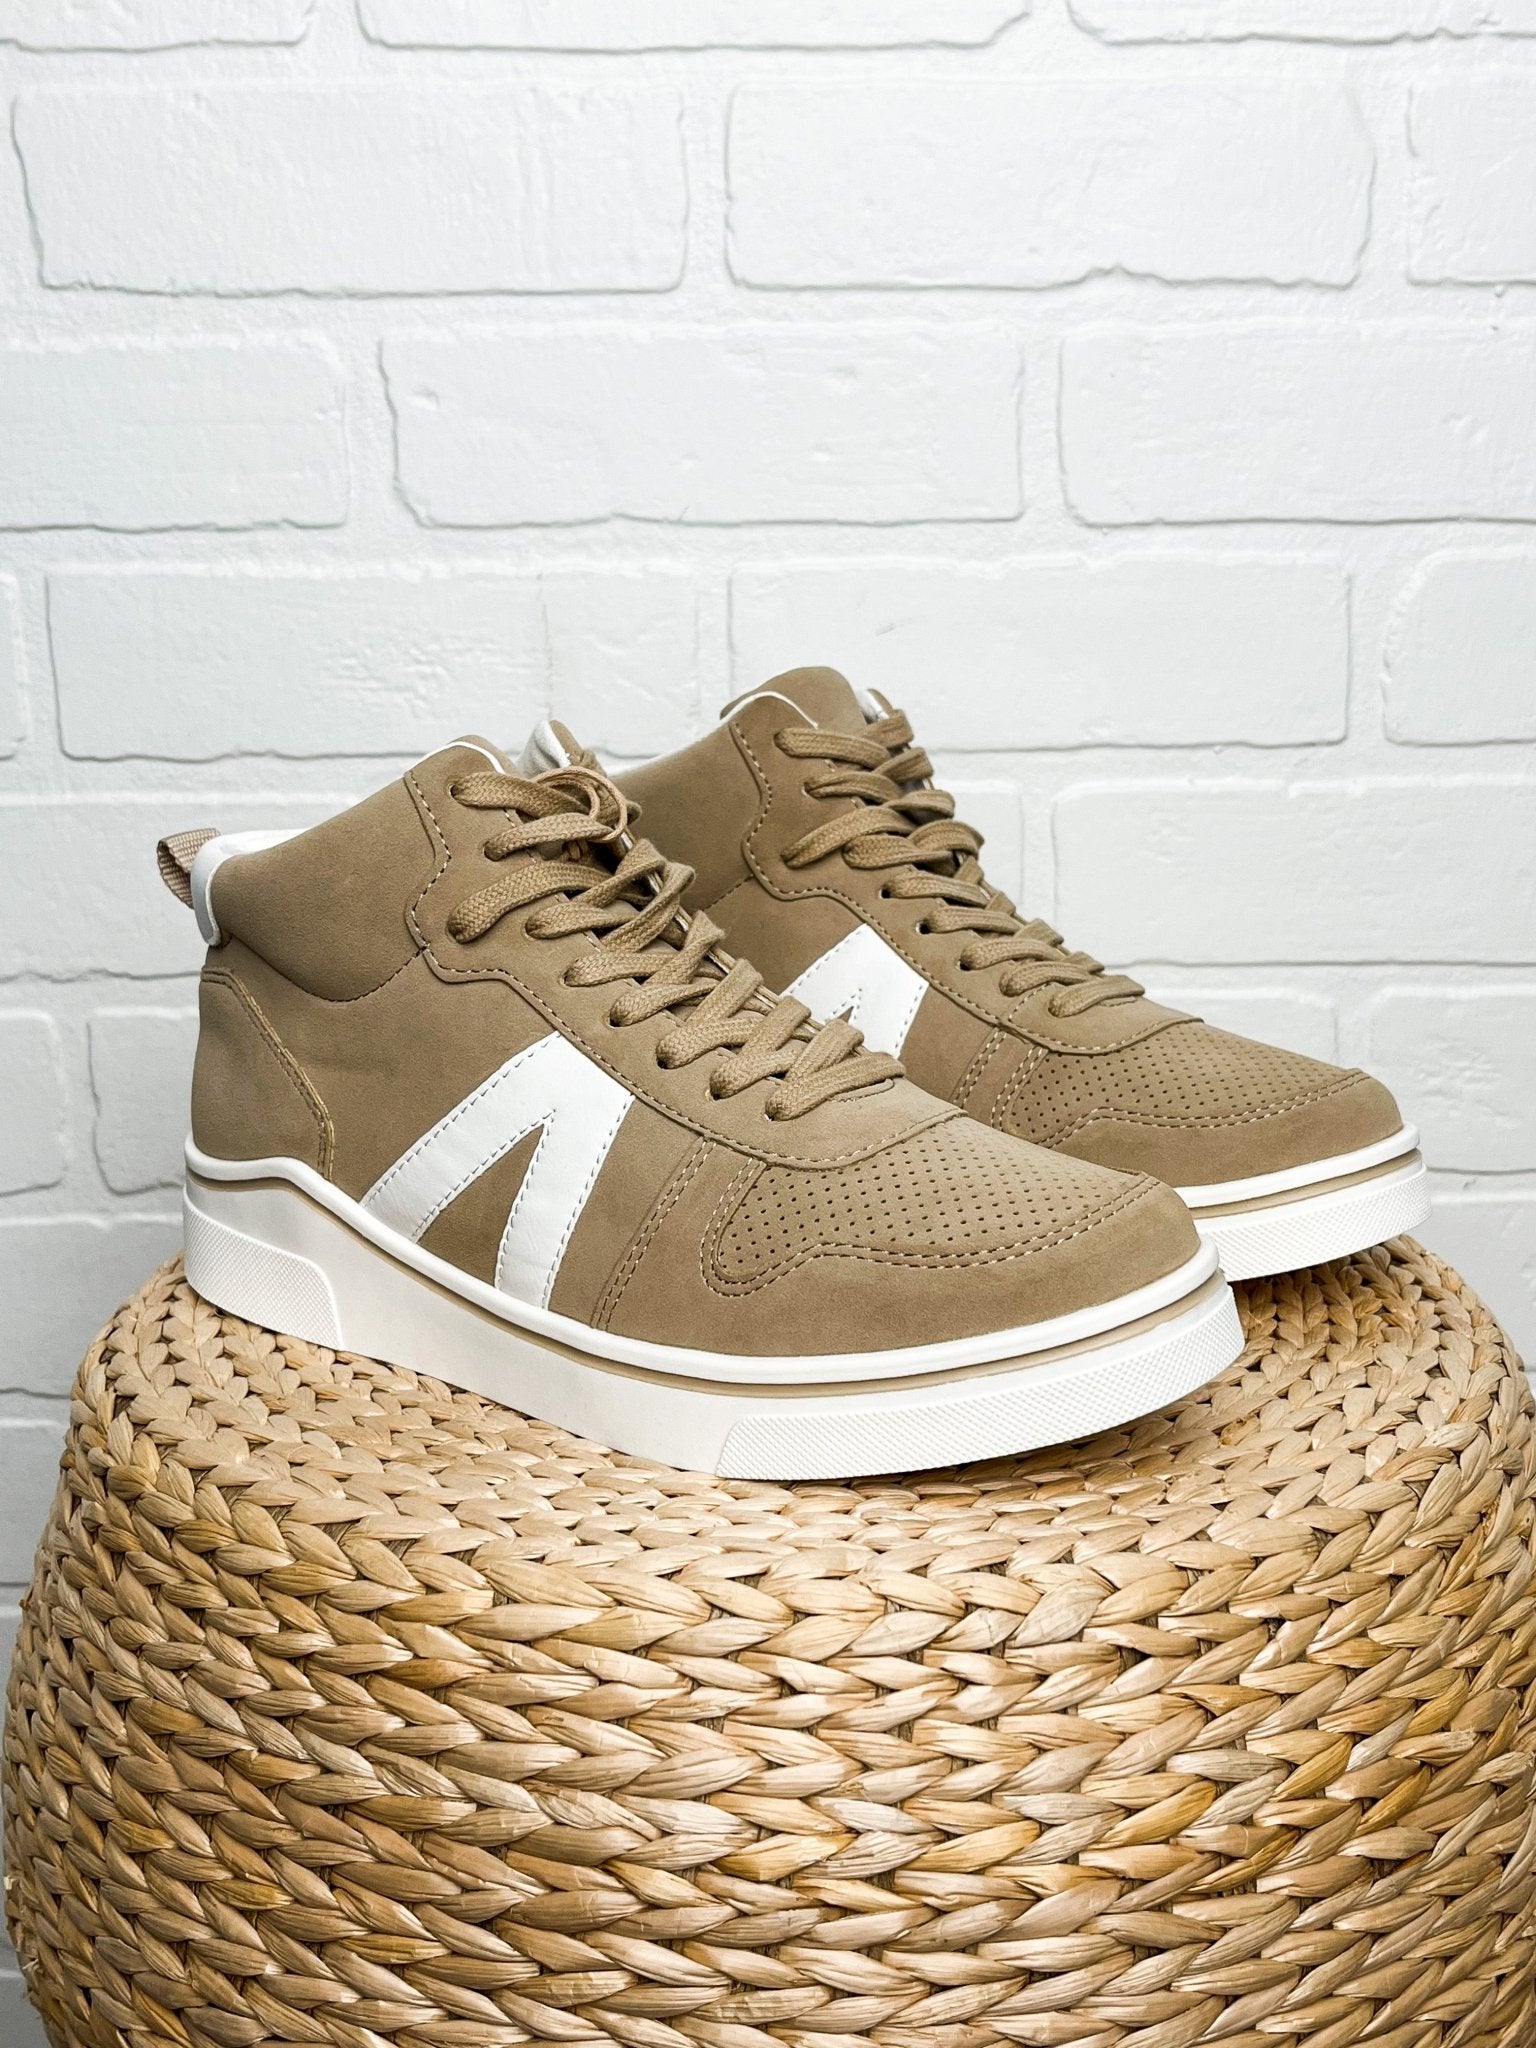 Gio high top sneaker sand/white - Trendy Shoes - Fashion Shoes at Lush Fashion Lounge Boutique in Oklahoma City